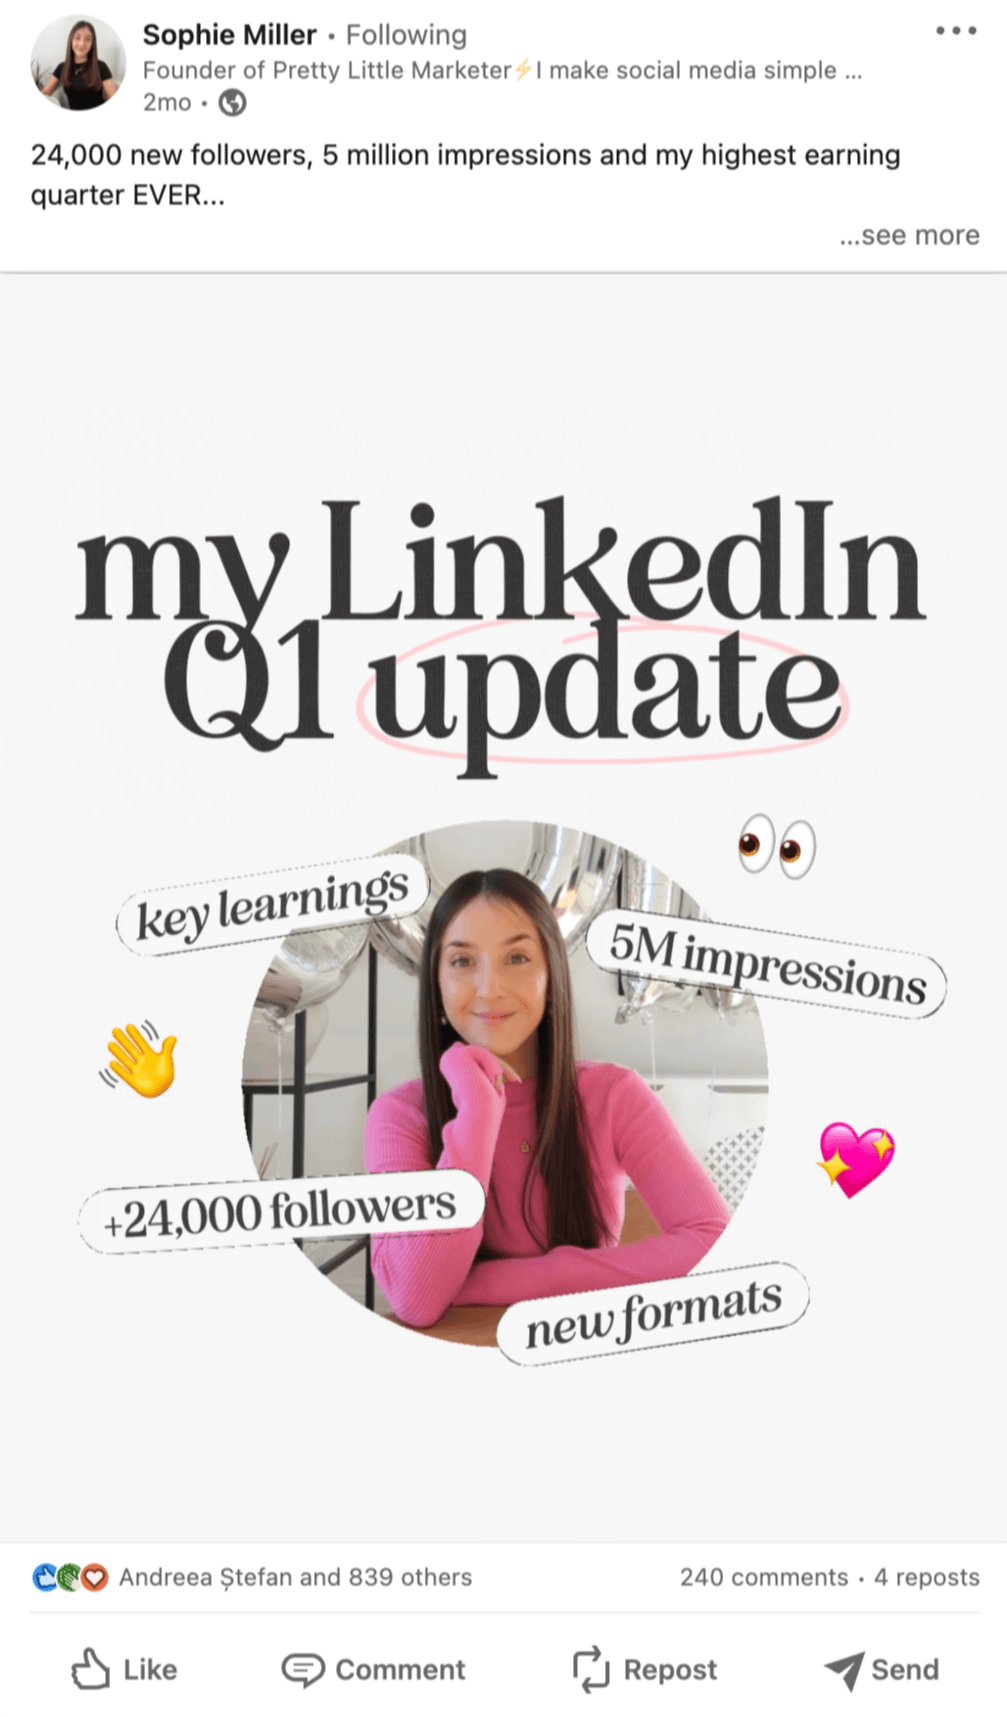 LinkedIn carousel quarterly update from Sophie Miller showing 24000 new followers, 5M impressions, key learnings and more.